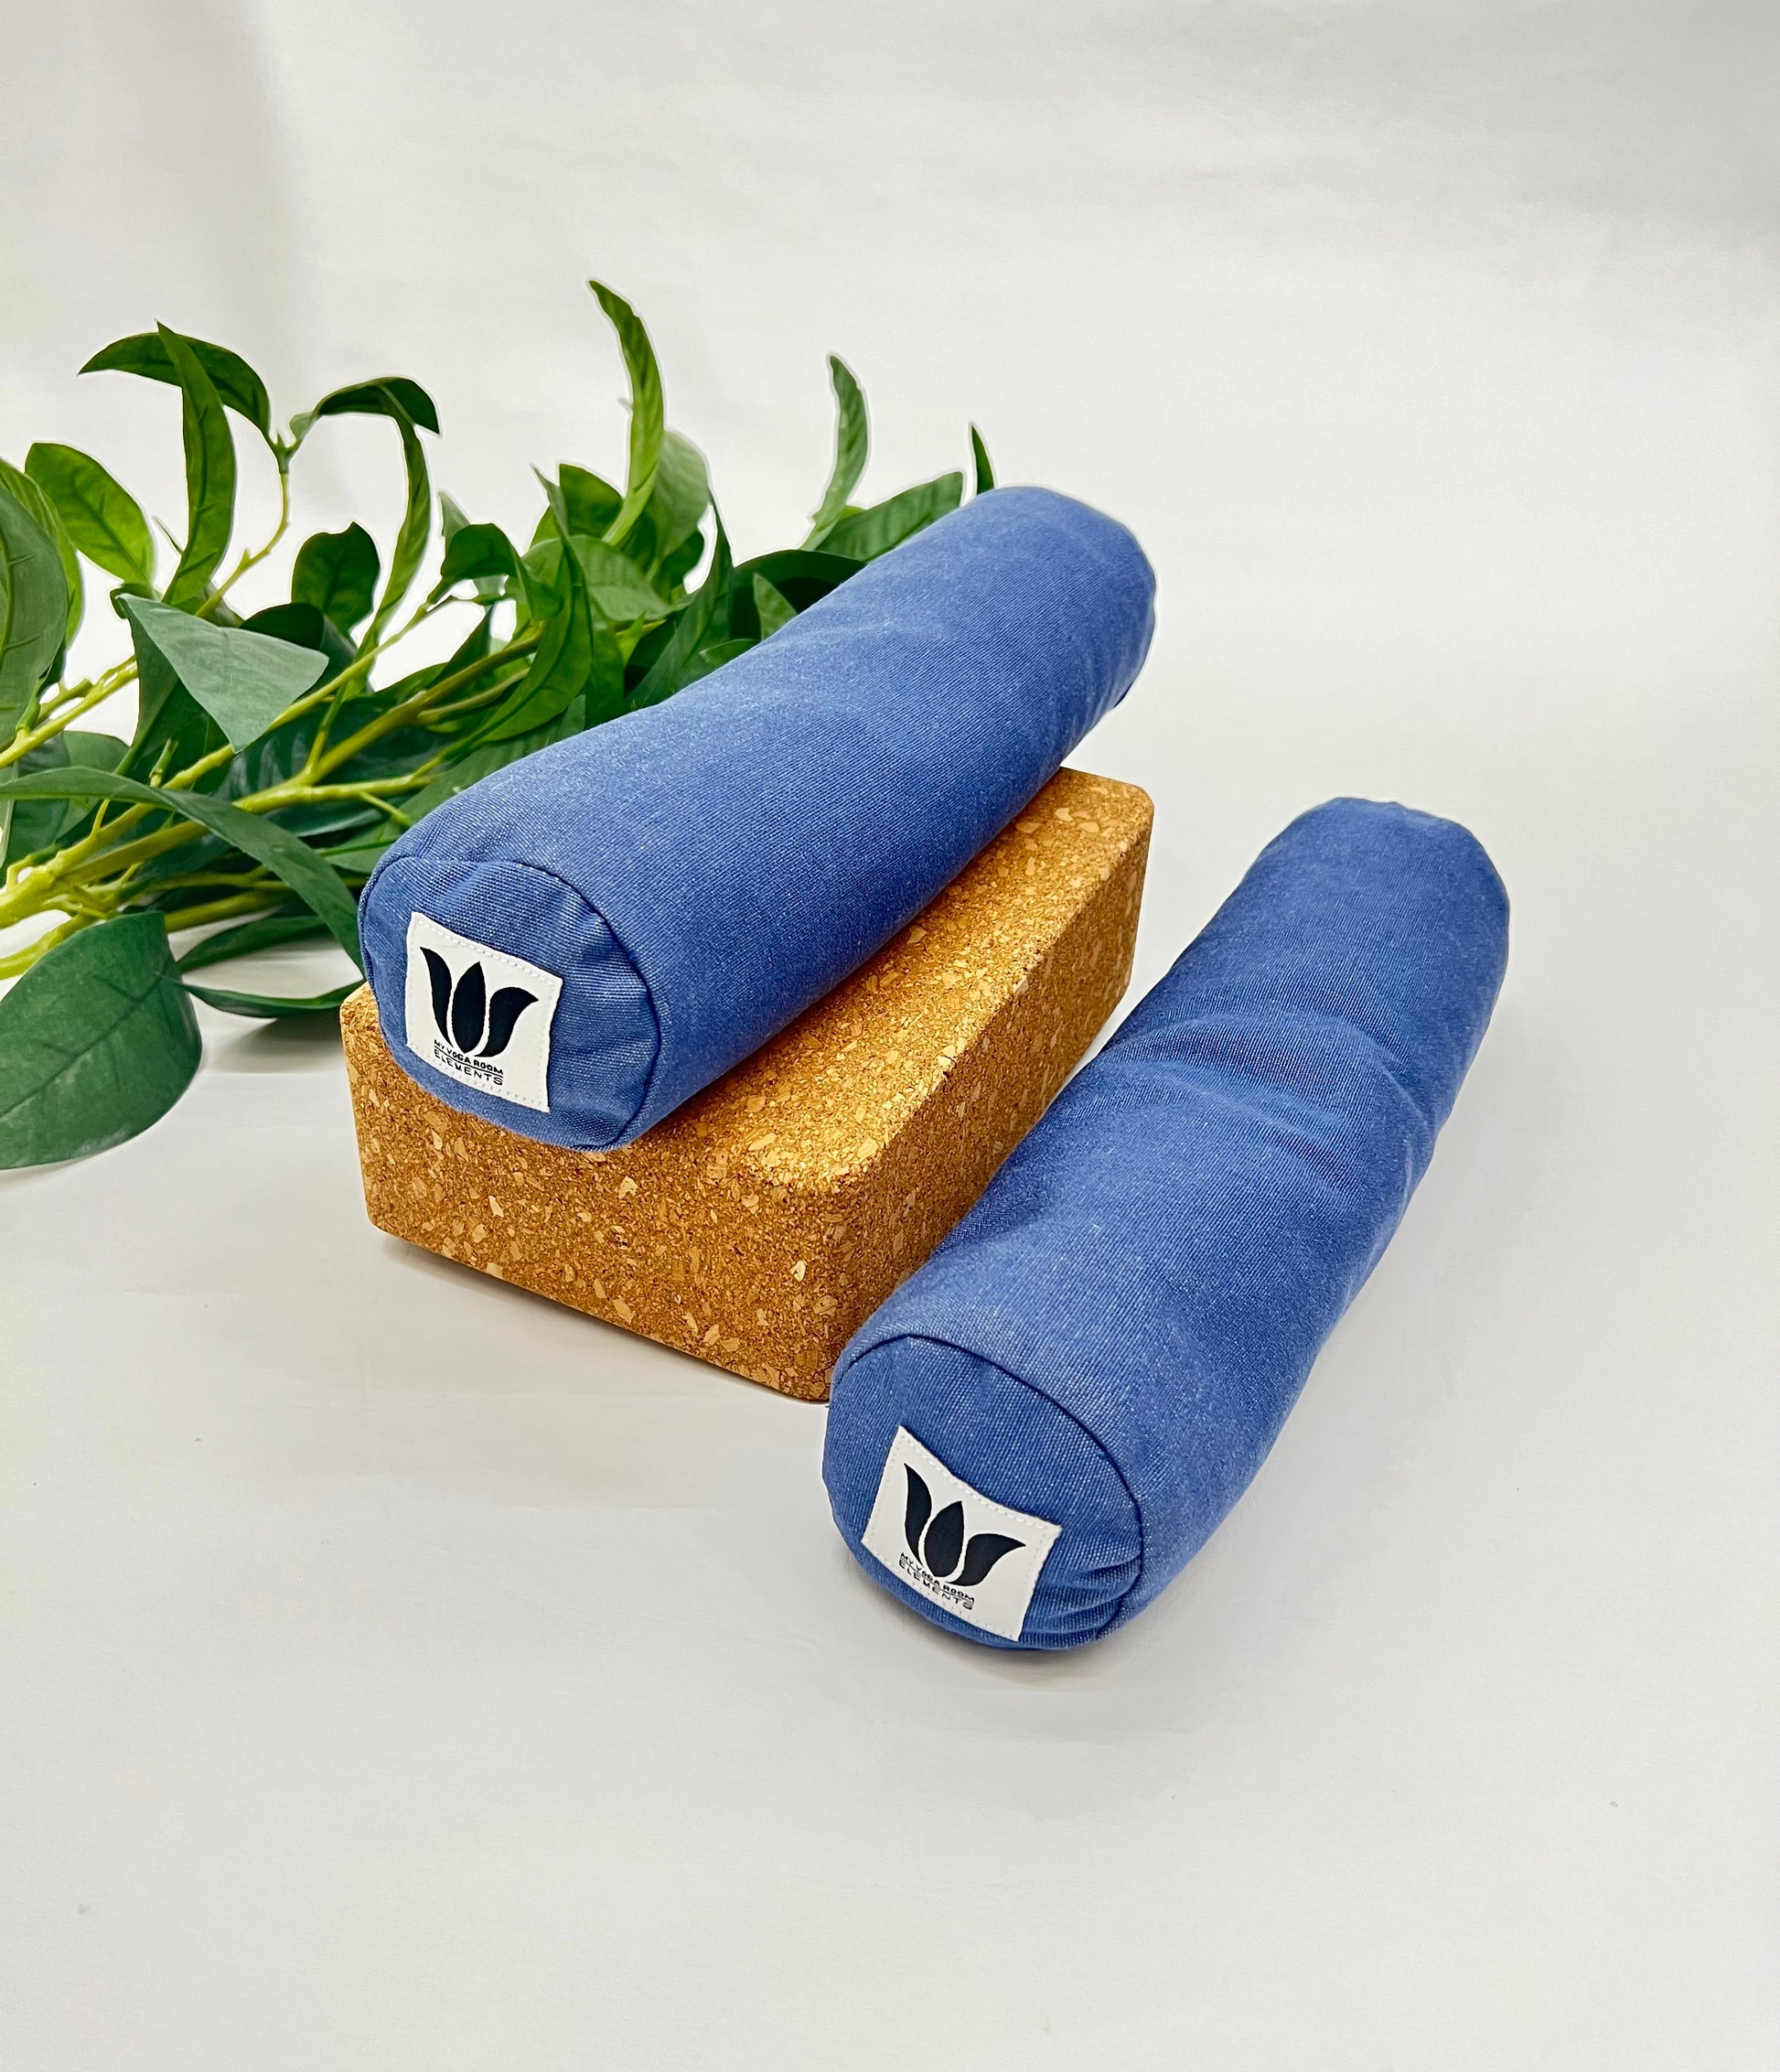 Mini yoga bolster in durable fabric, solid medium blue fabric. Cushion and support the body in the practice of yoga and meditation.Removeable cover. Made in Canada by My Yoga Room Elements